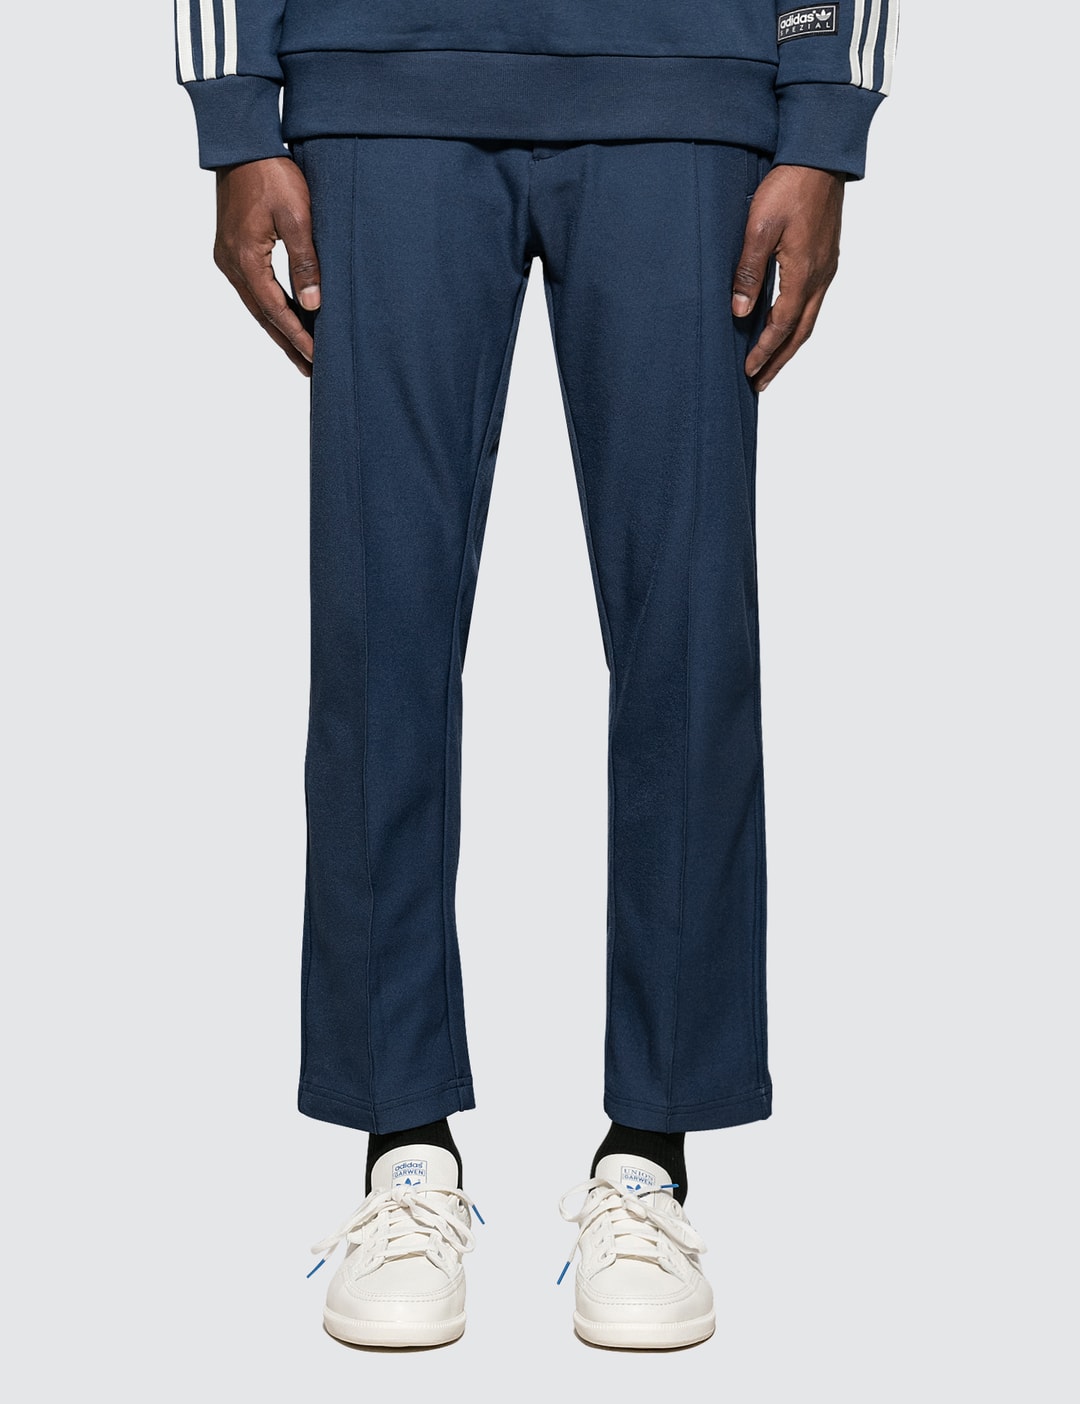 Adidas - Union LA x Adidas SPEZIAL Track Pants | HBX - Globally Curated Fashion Lifestyle by Hypebeast